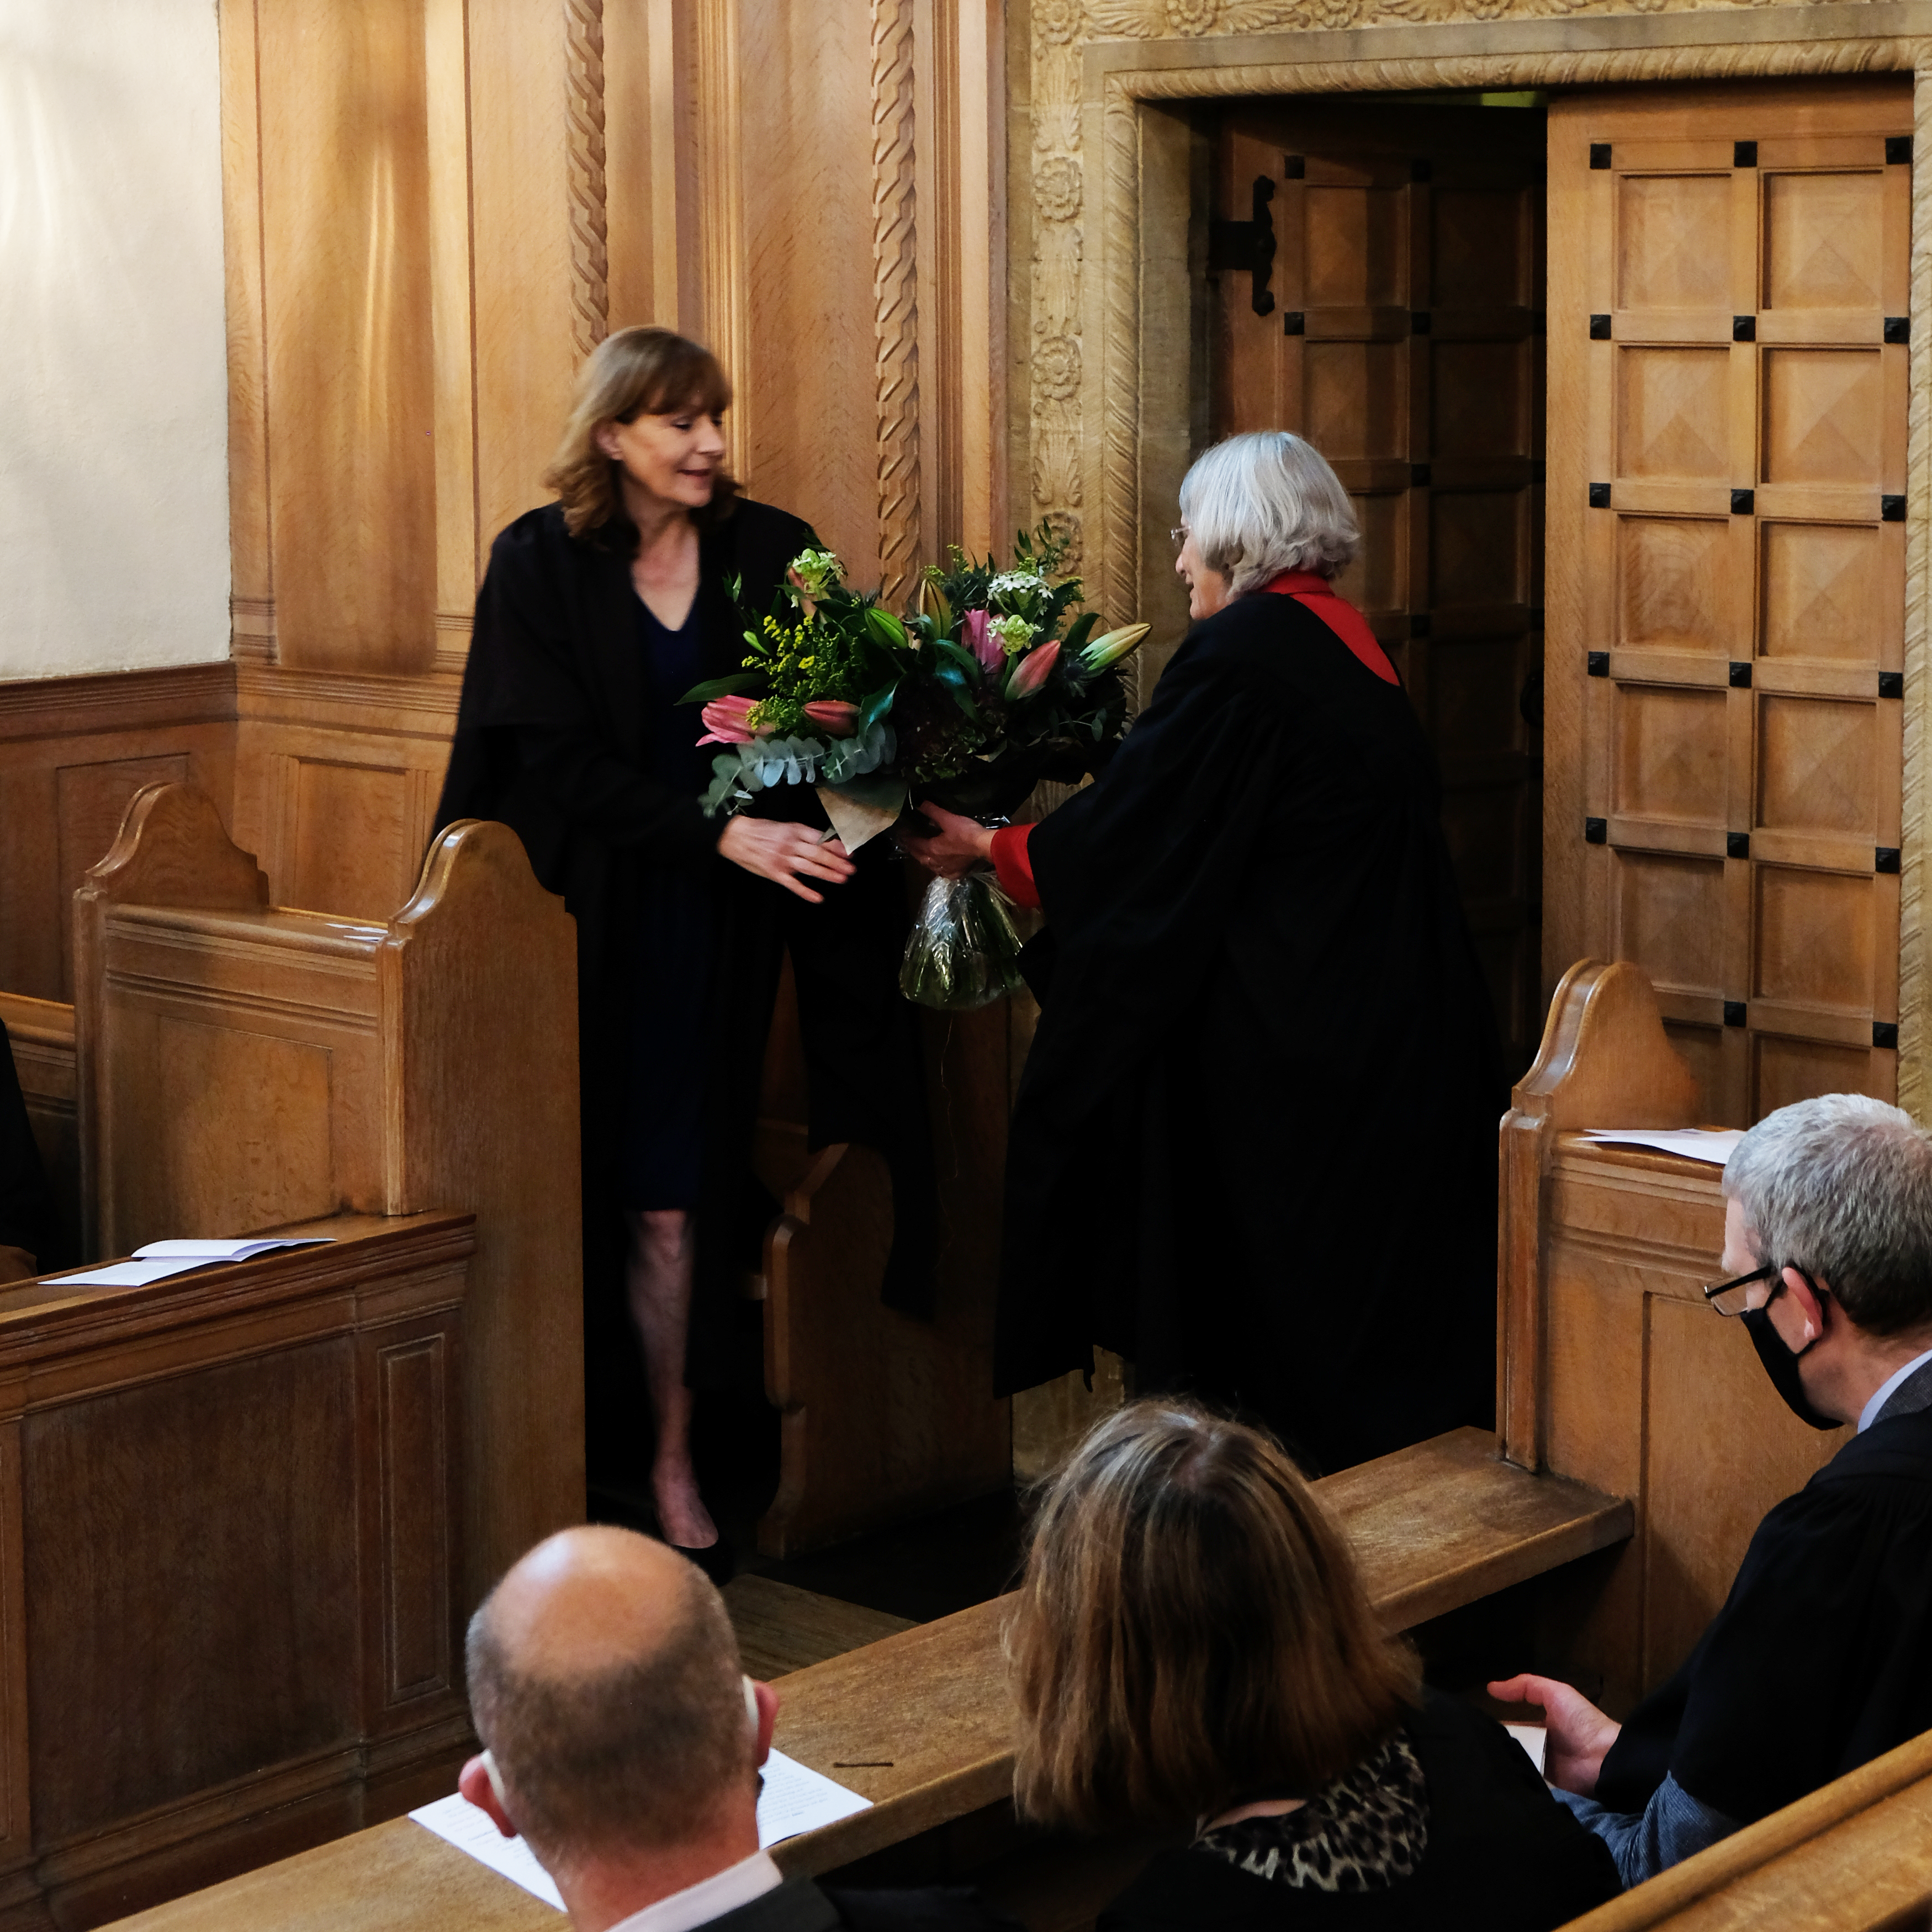 Professor Christine Gerrard being handed flowers in the LMH Chapel at the Principal's Inauguration